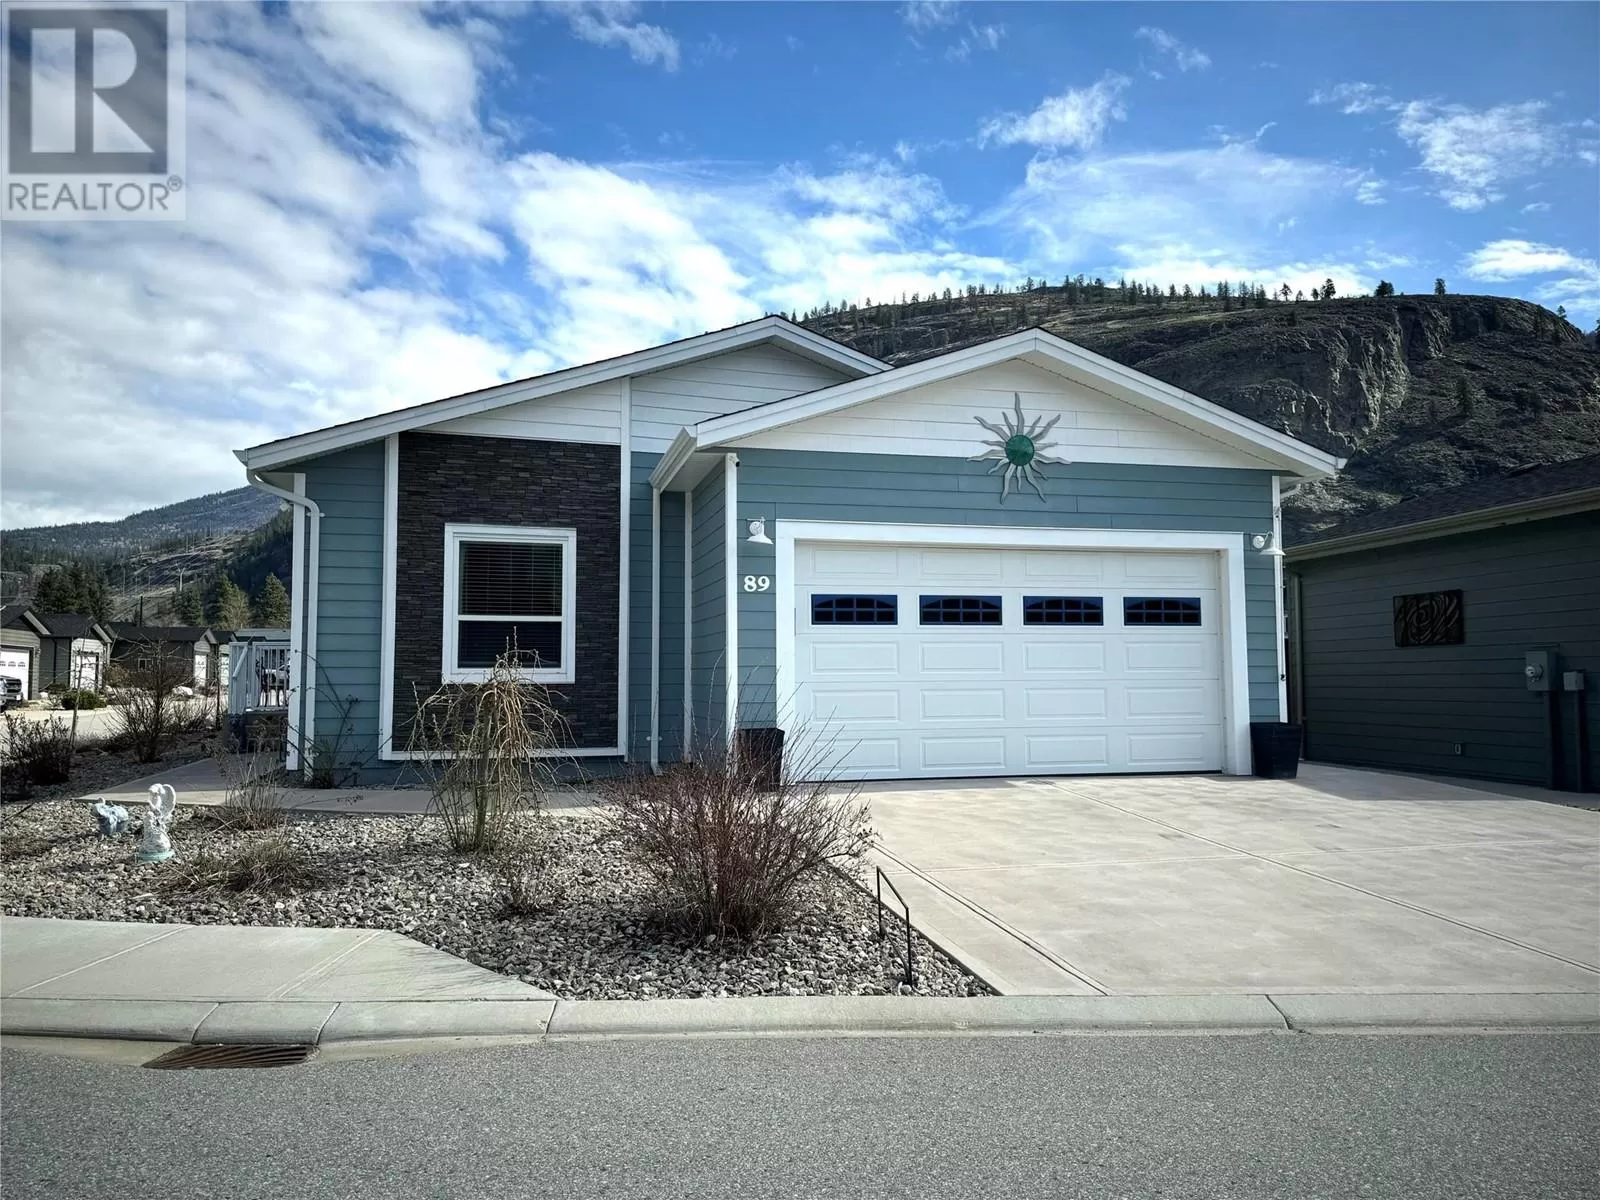 Manufactured Home for rent: 8300 Gallagher Lake Frontage Road Unit# 89, Oliver, British Columbia V0H 1T2